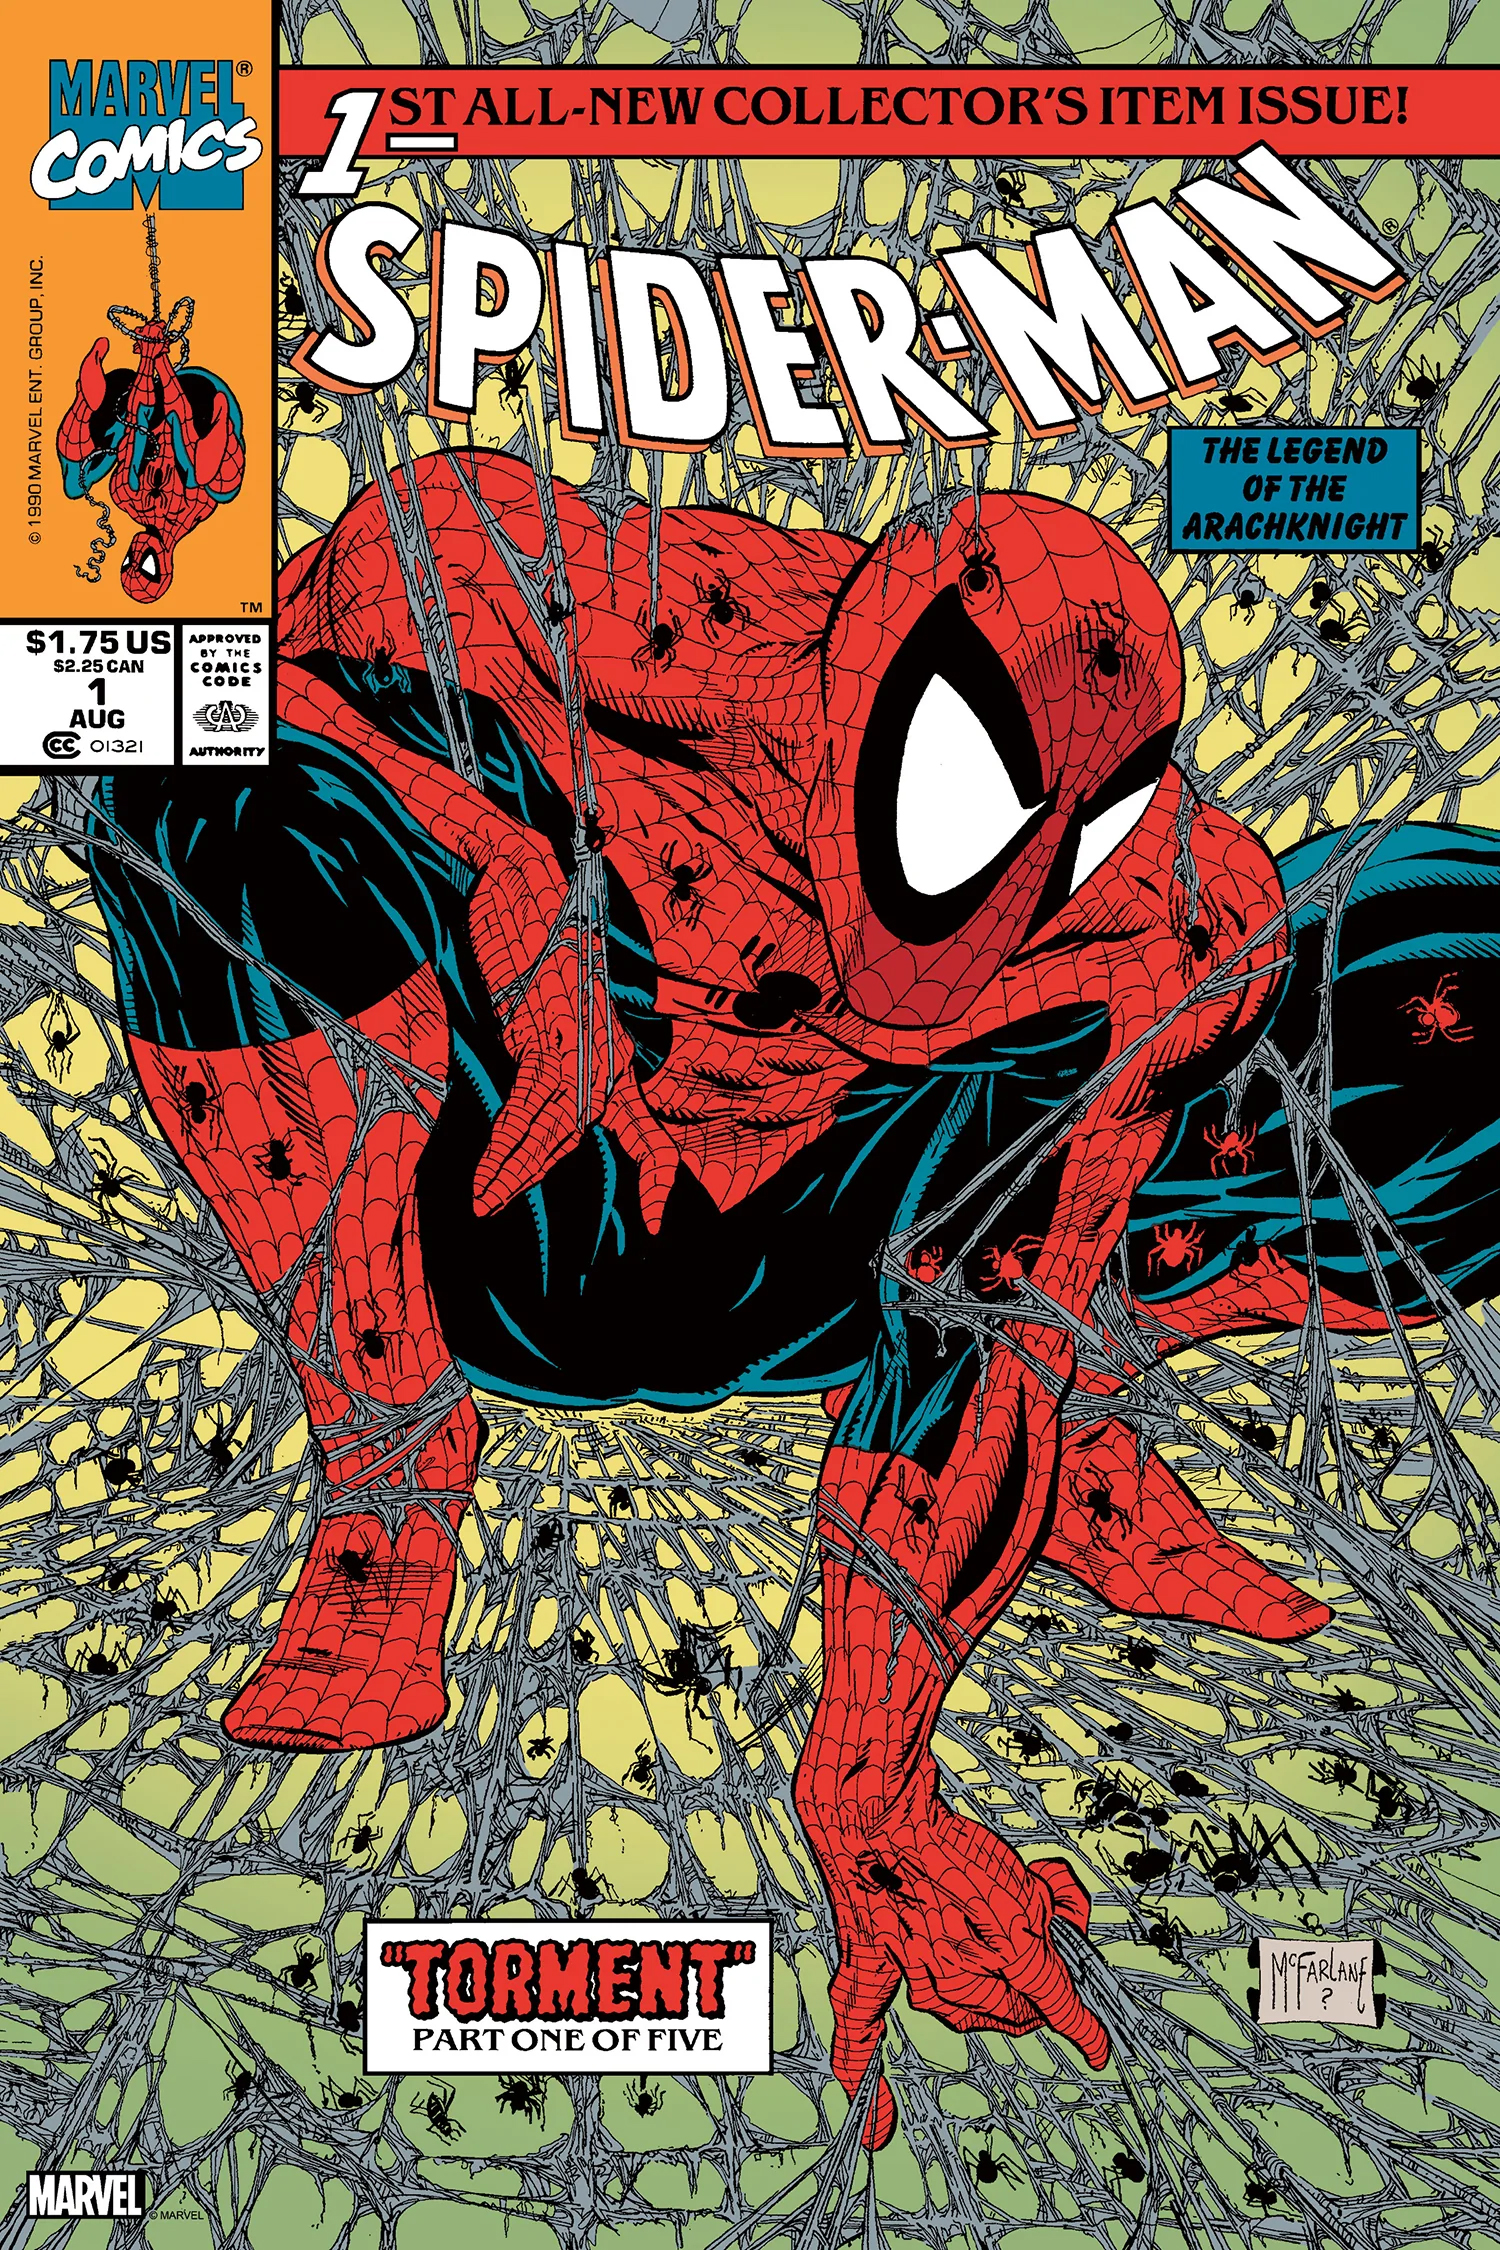 Spiderman cover illustrated by Todd McFarlane